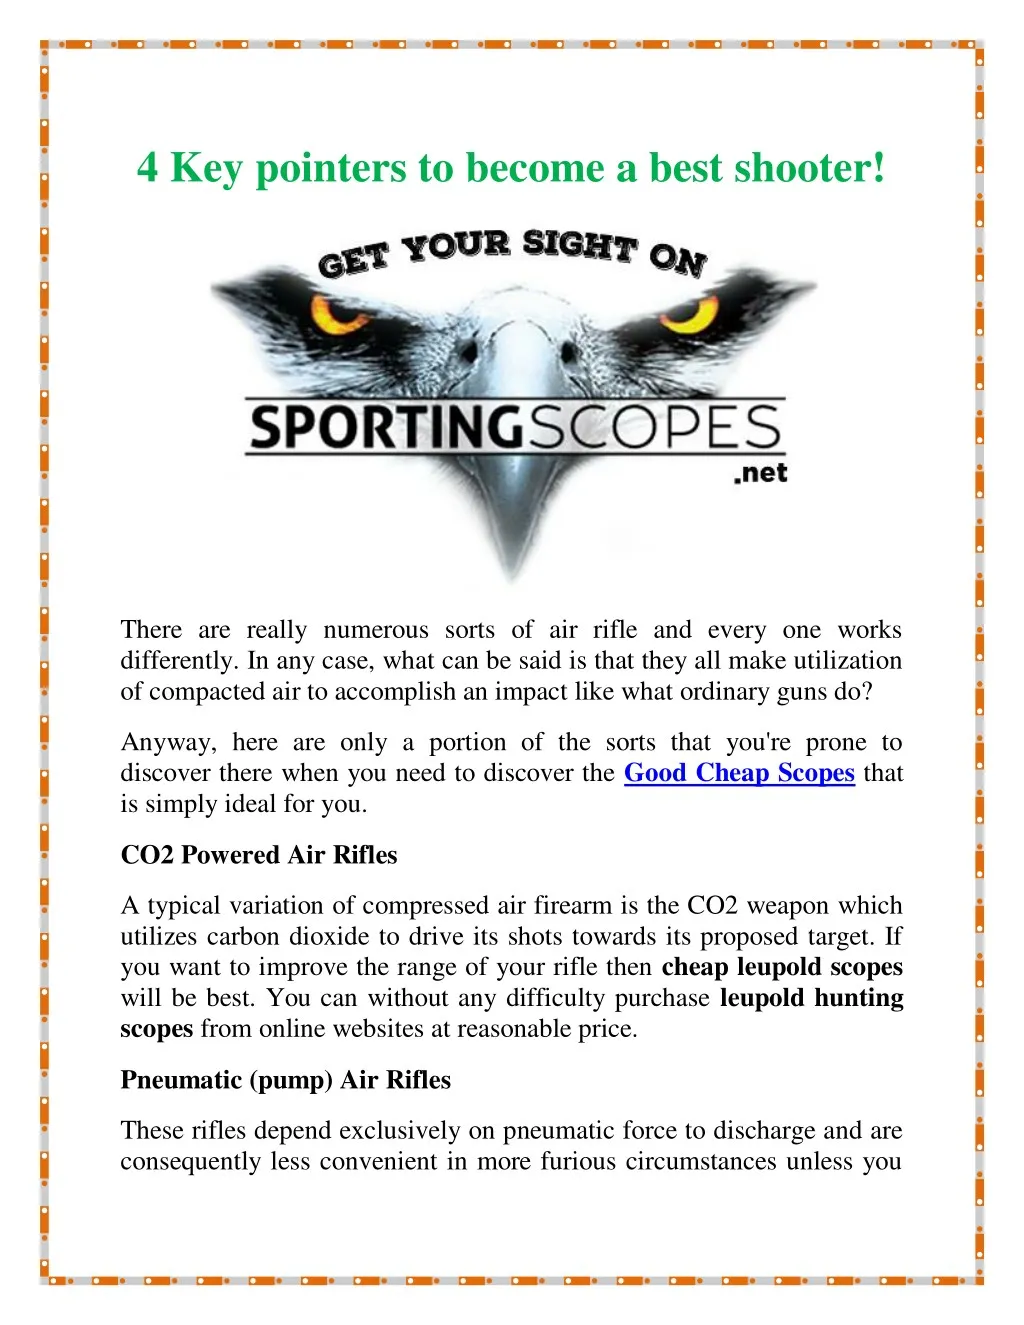 4 key pointers to become a best shooter